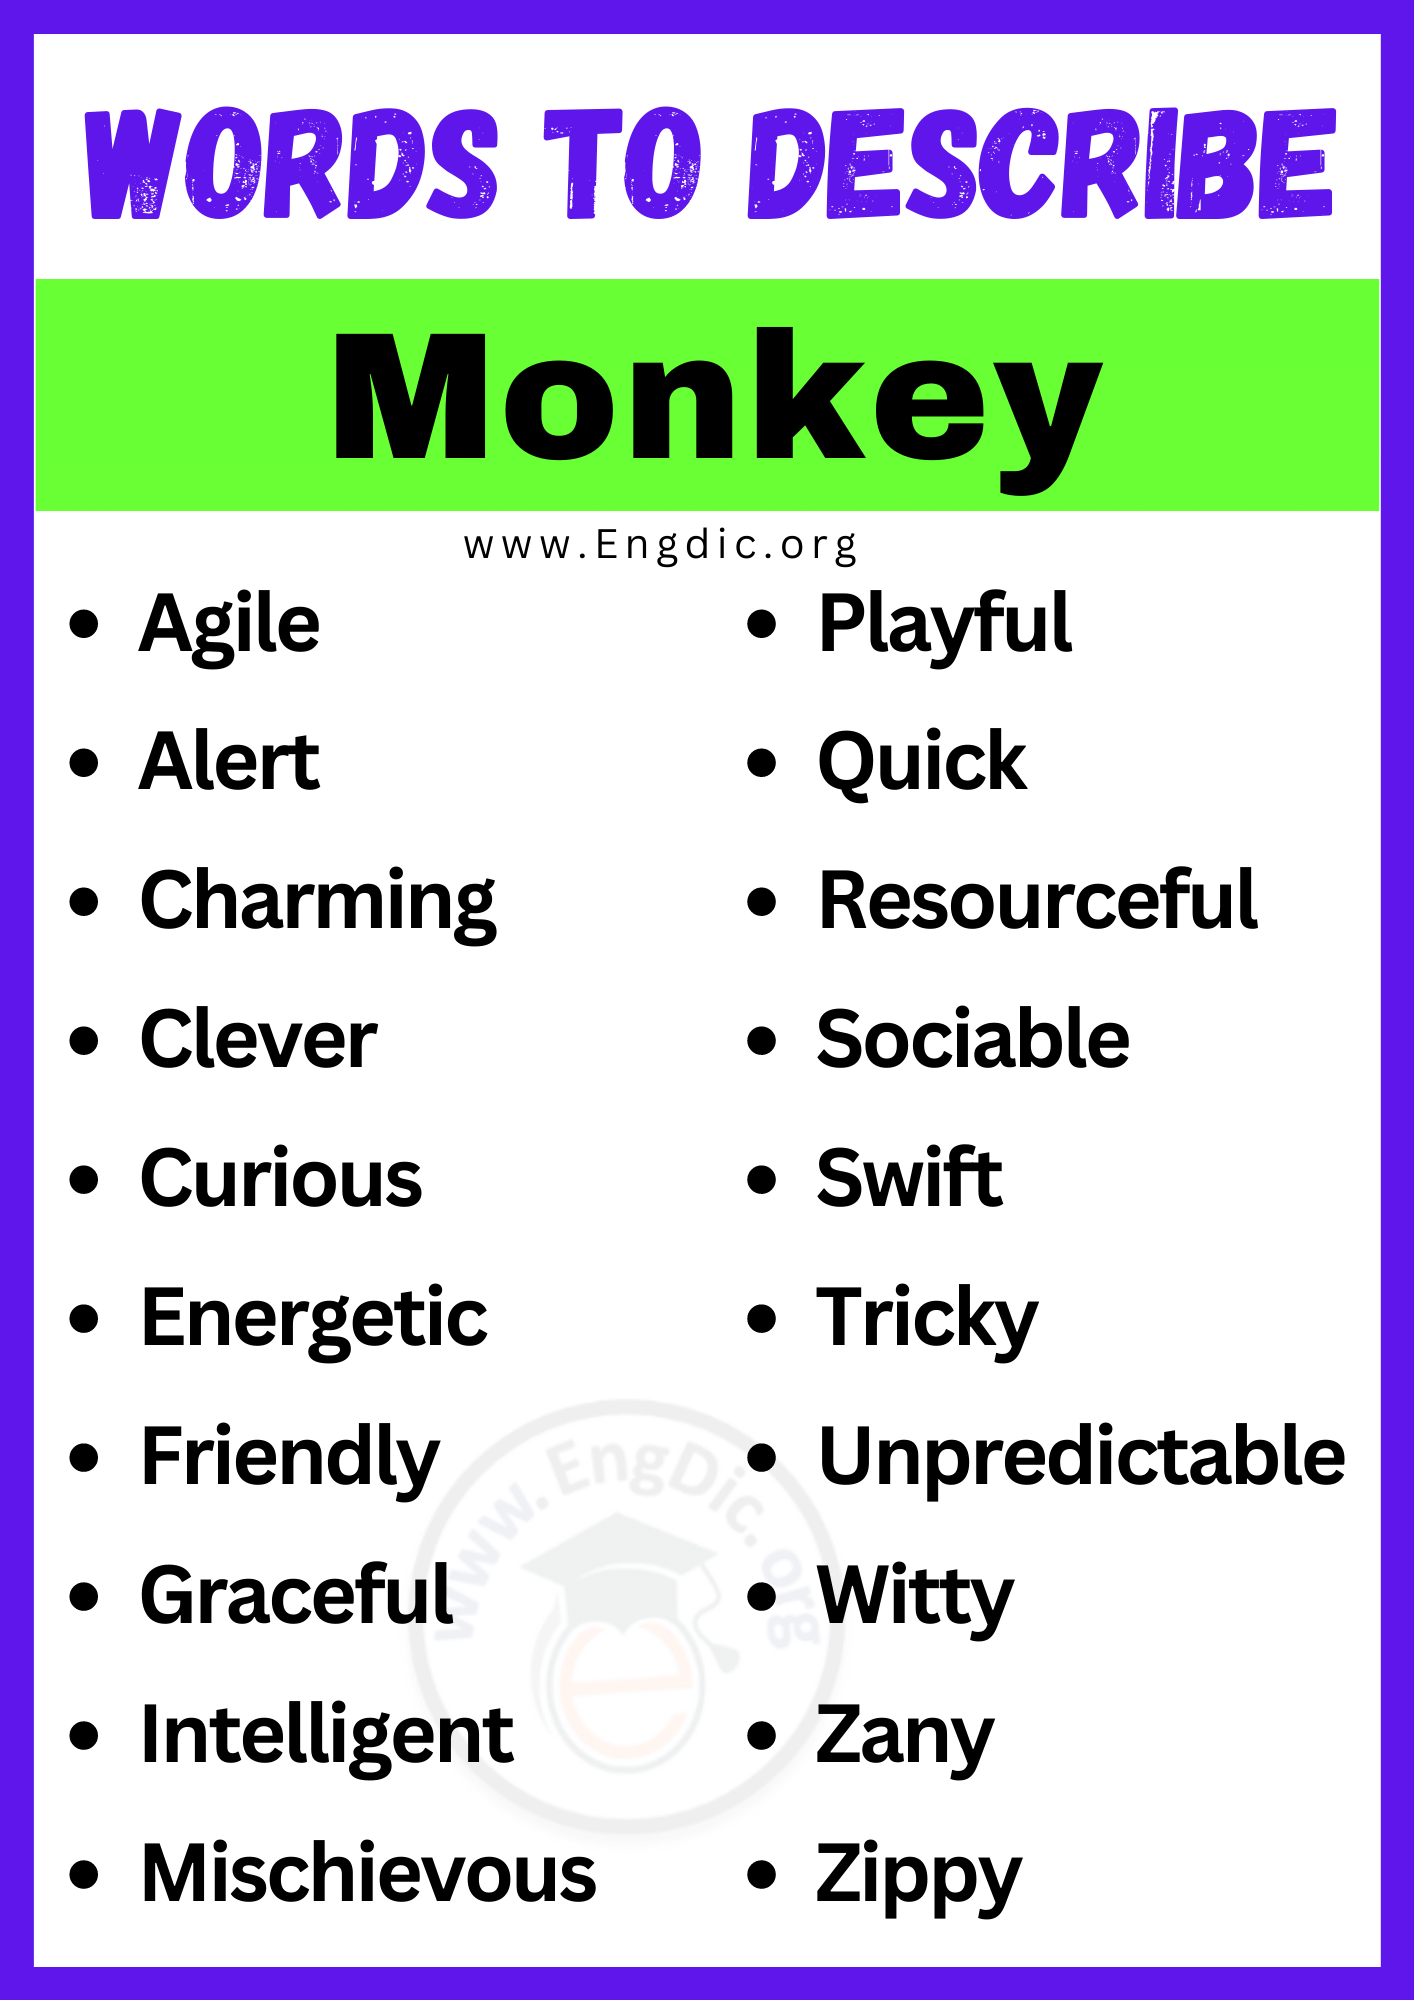 Words to Describe Monkey